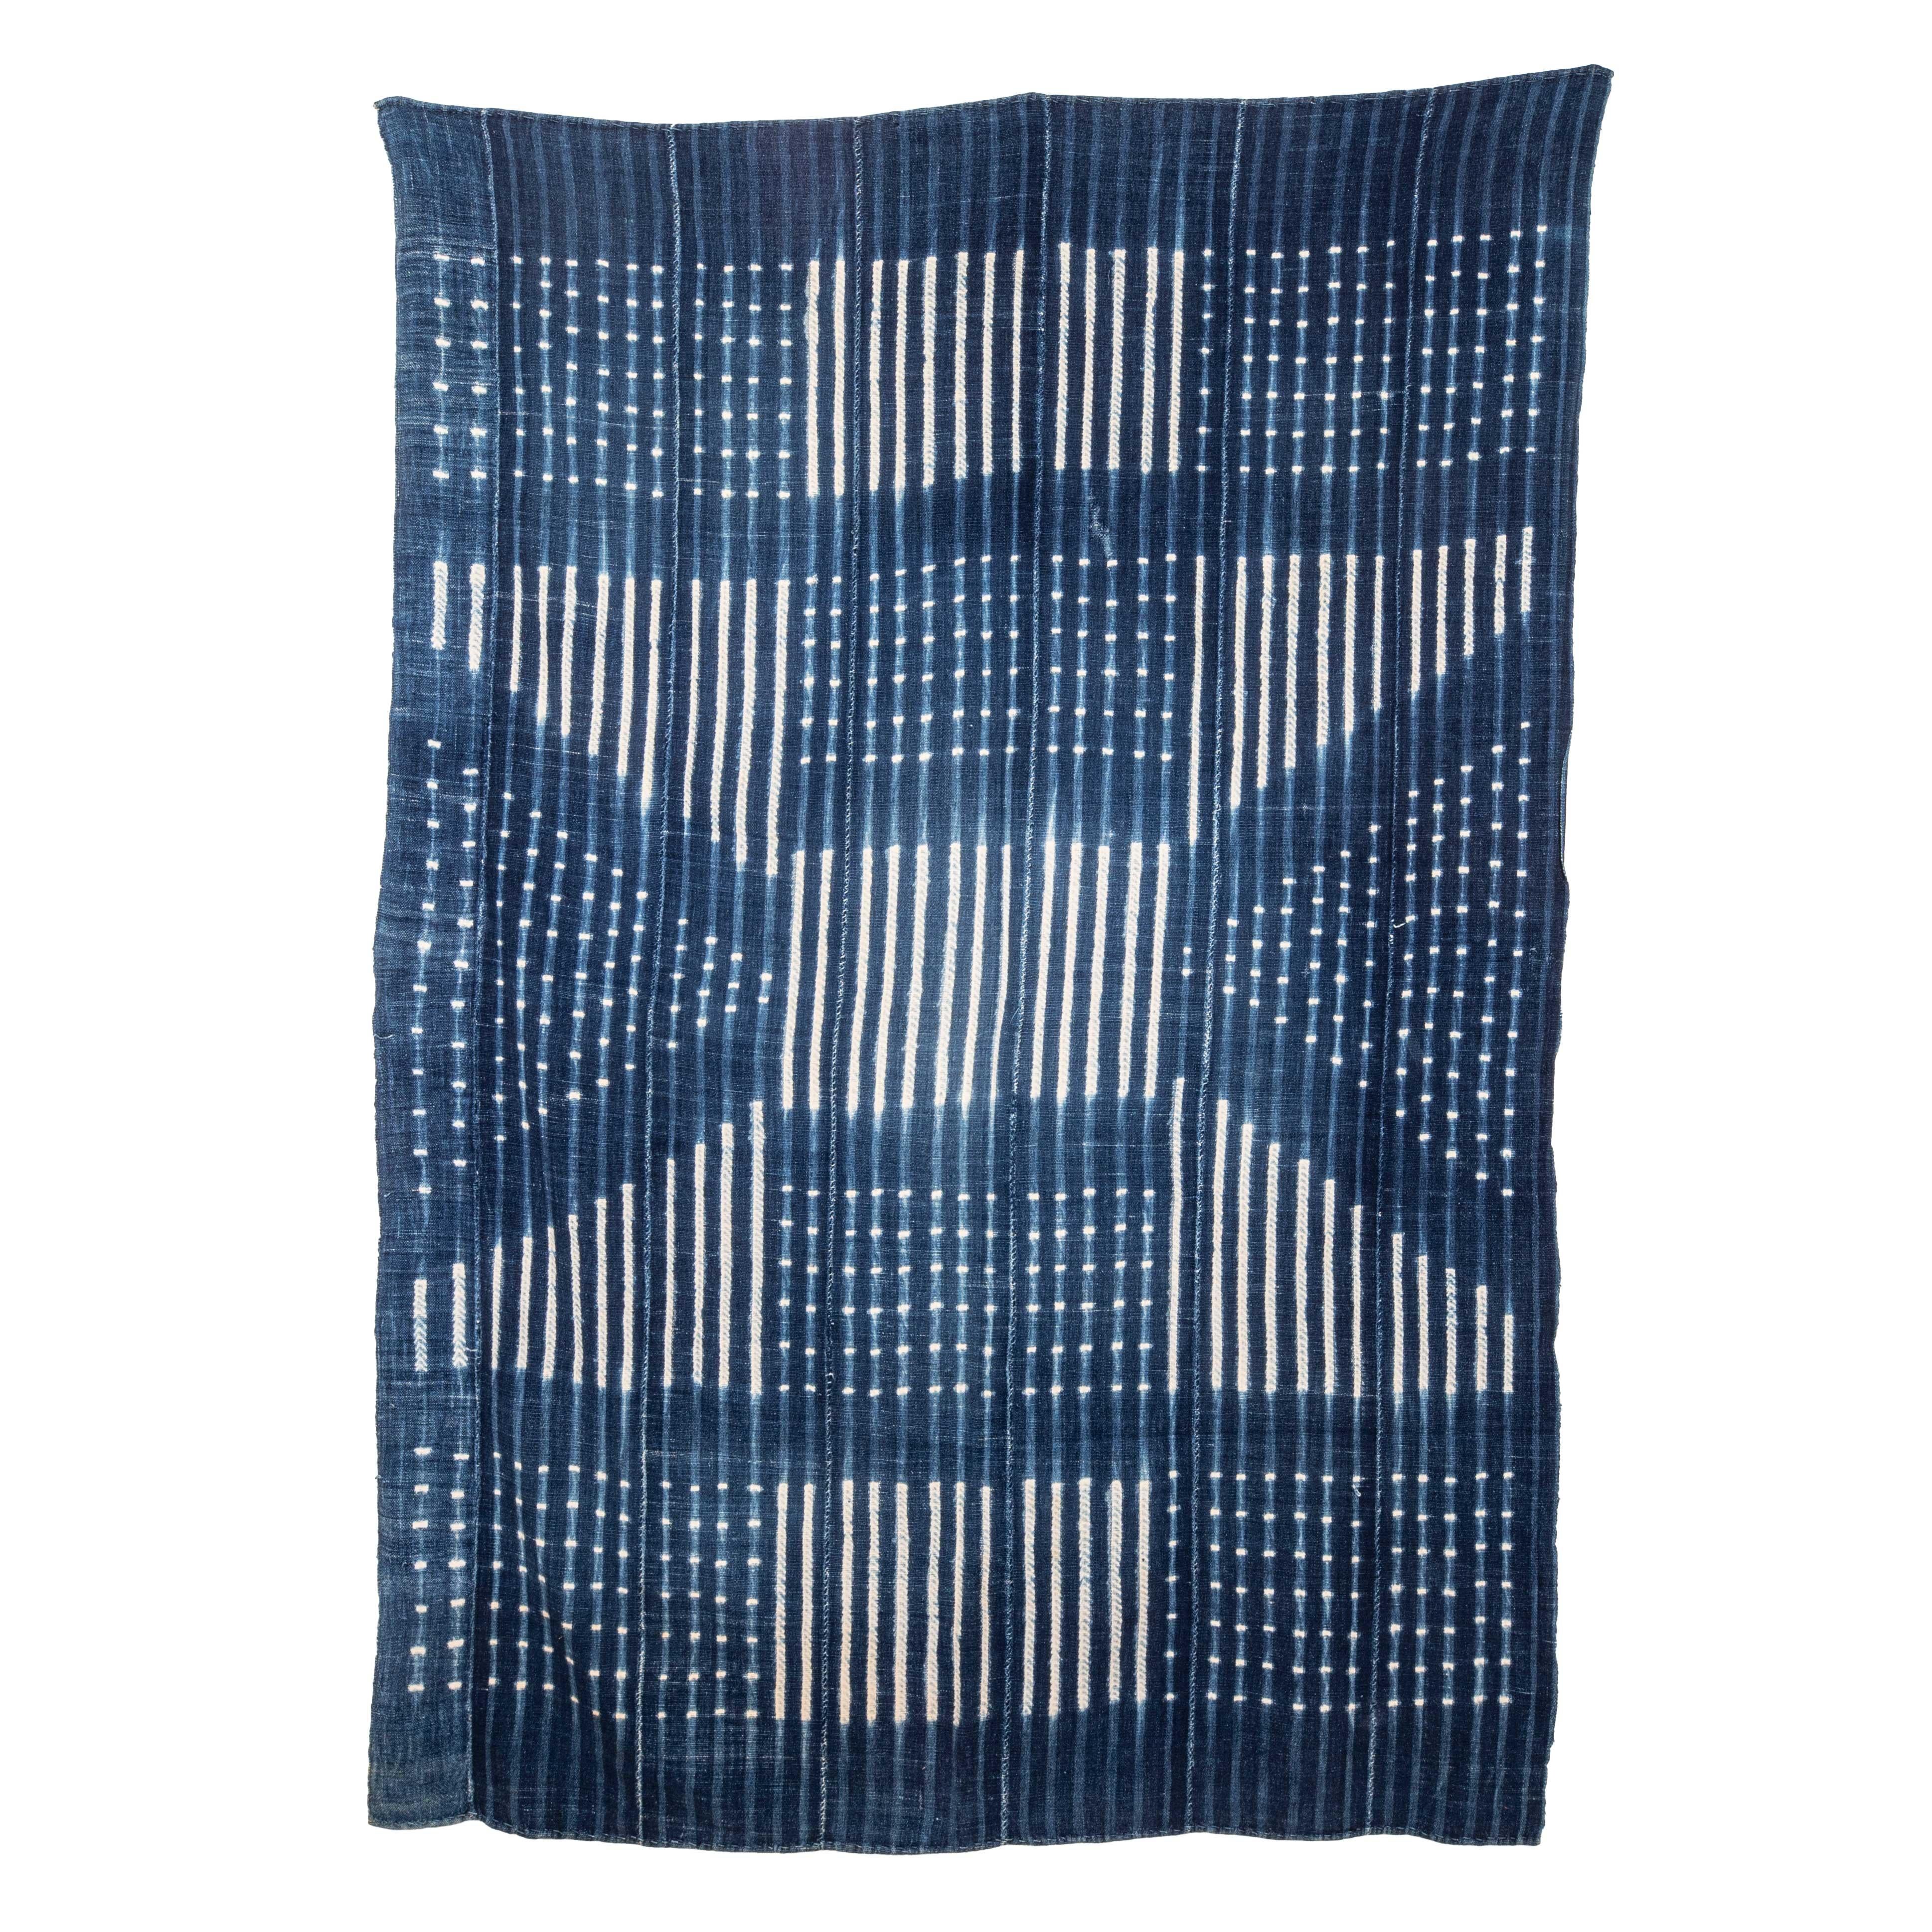 Indigo cloth perfect as a wall hanging or trow.